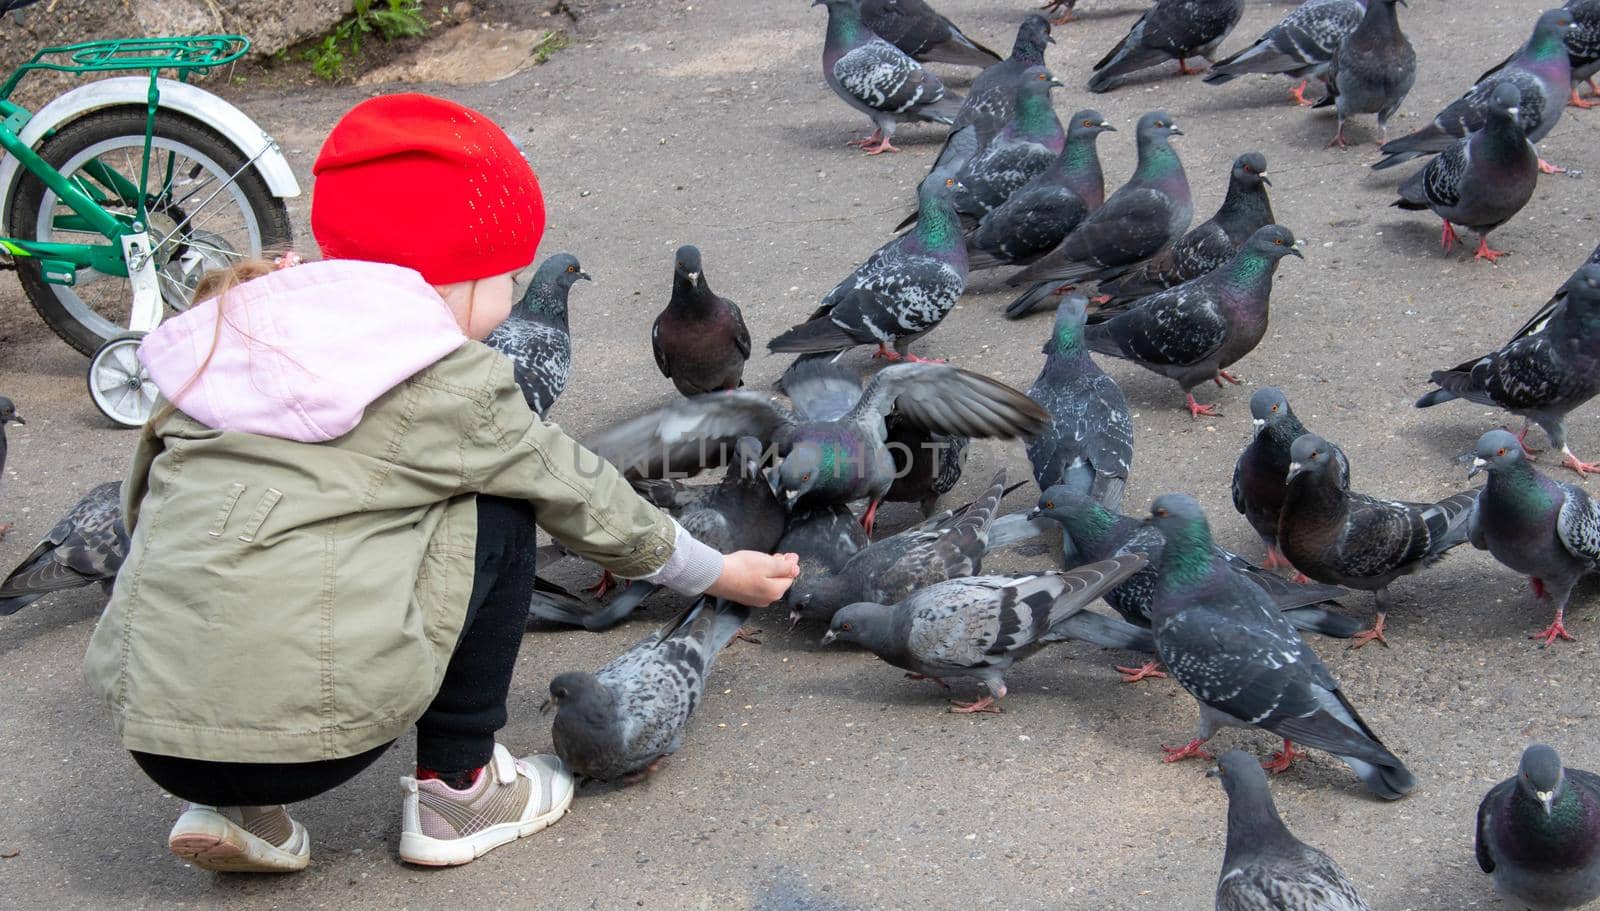 The girl turned to face the pigeons, squatted down, and began to feed them grain with her hand. by lapushka62